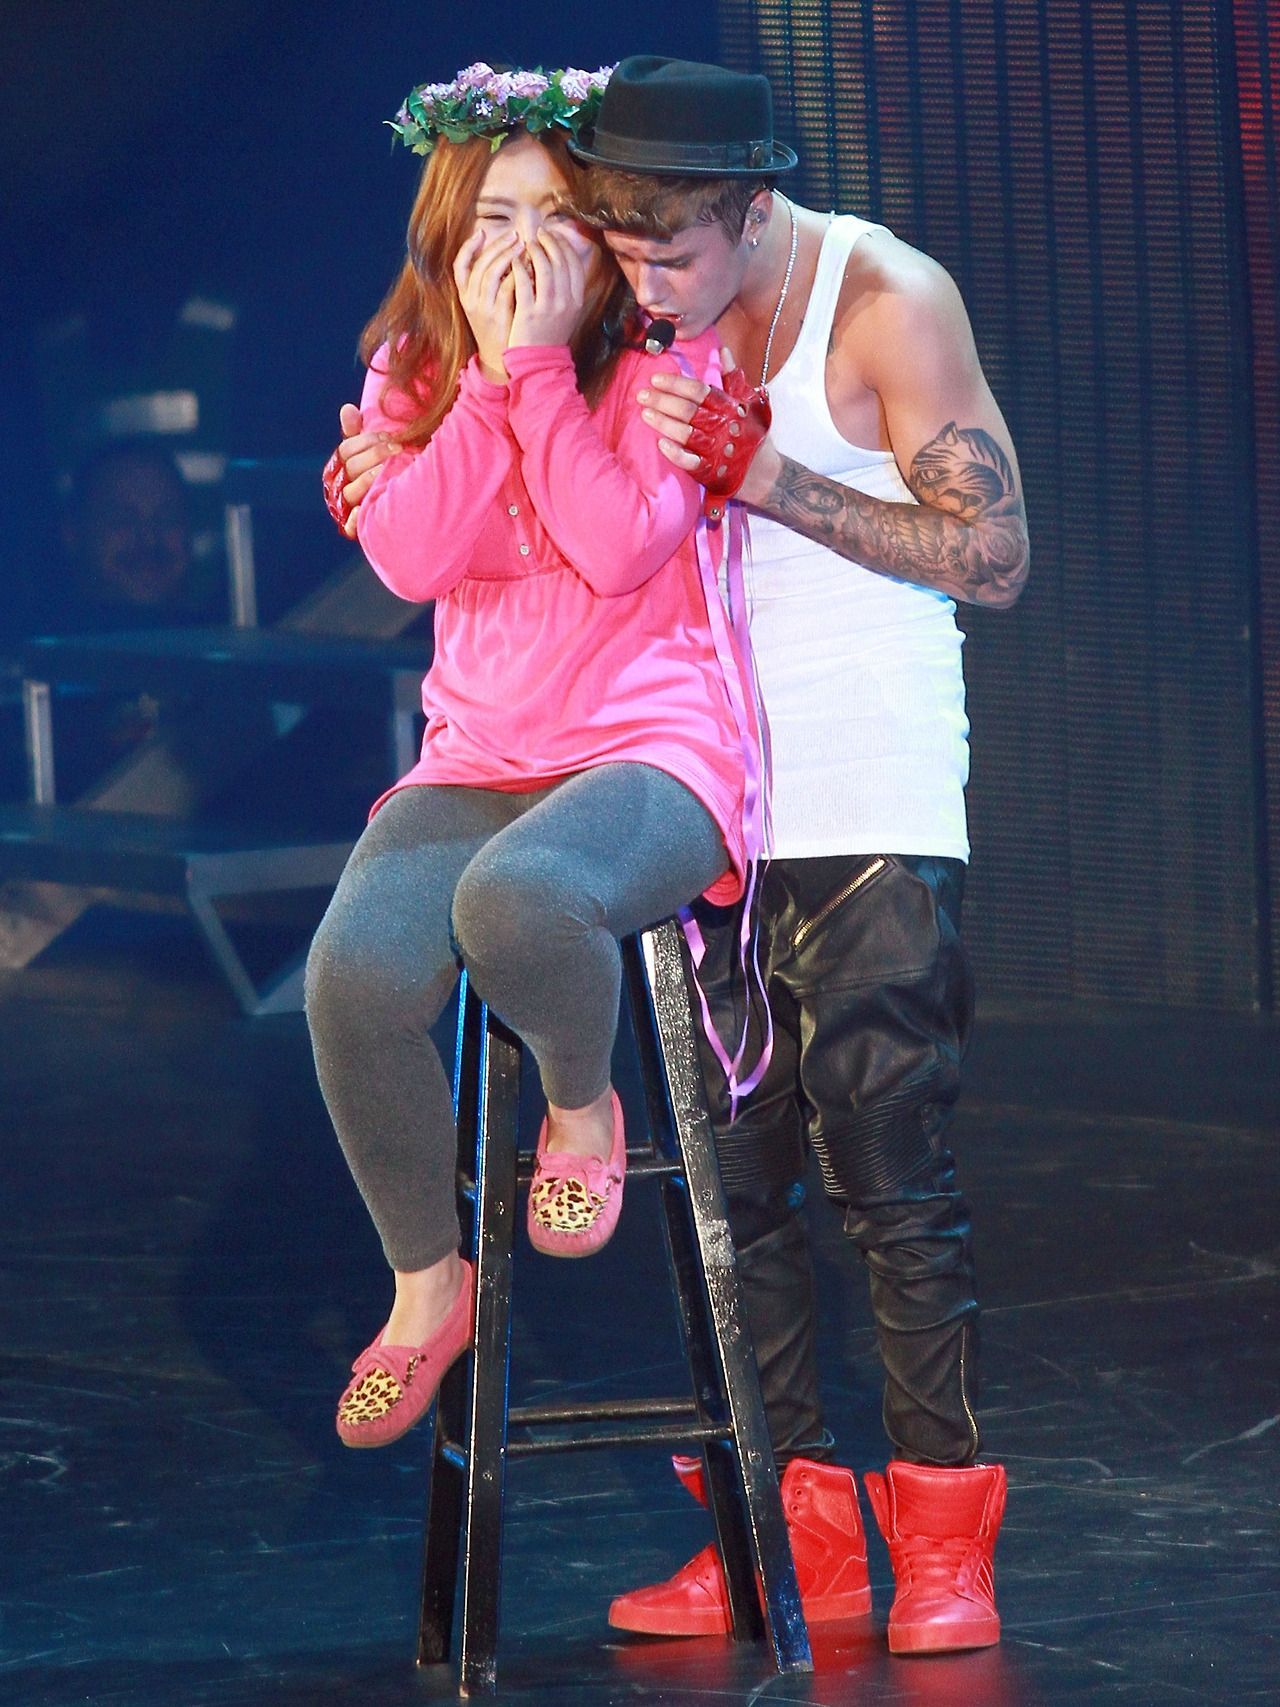 VIDEO: Justin Biebers One Less Lonely Girl Shanghai, CHINA